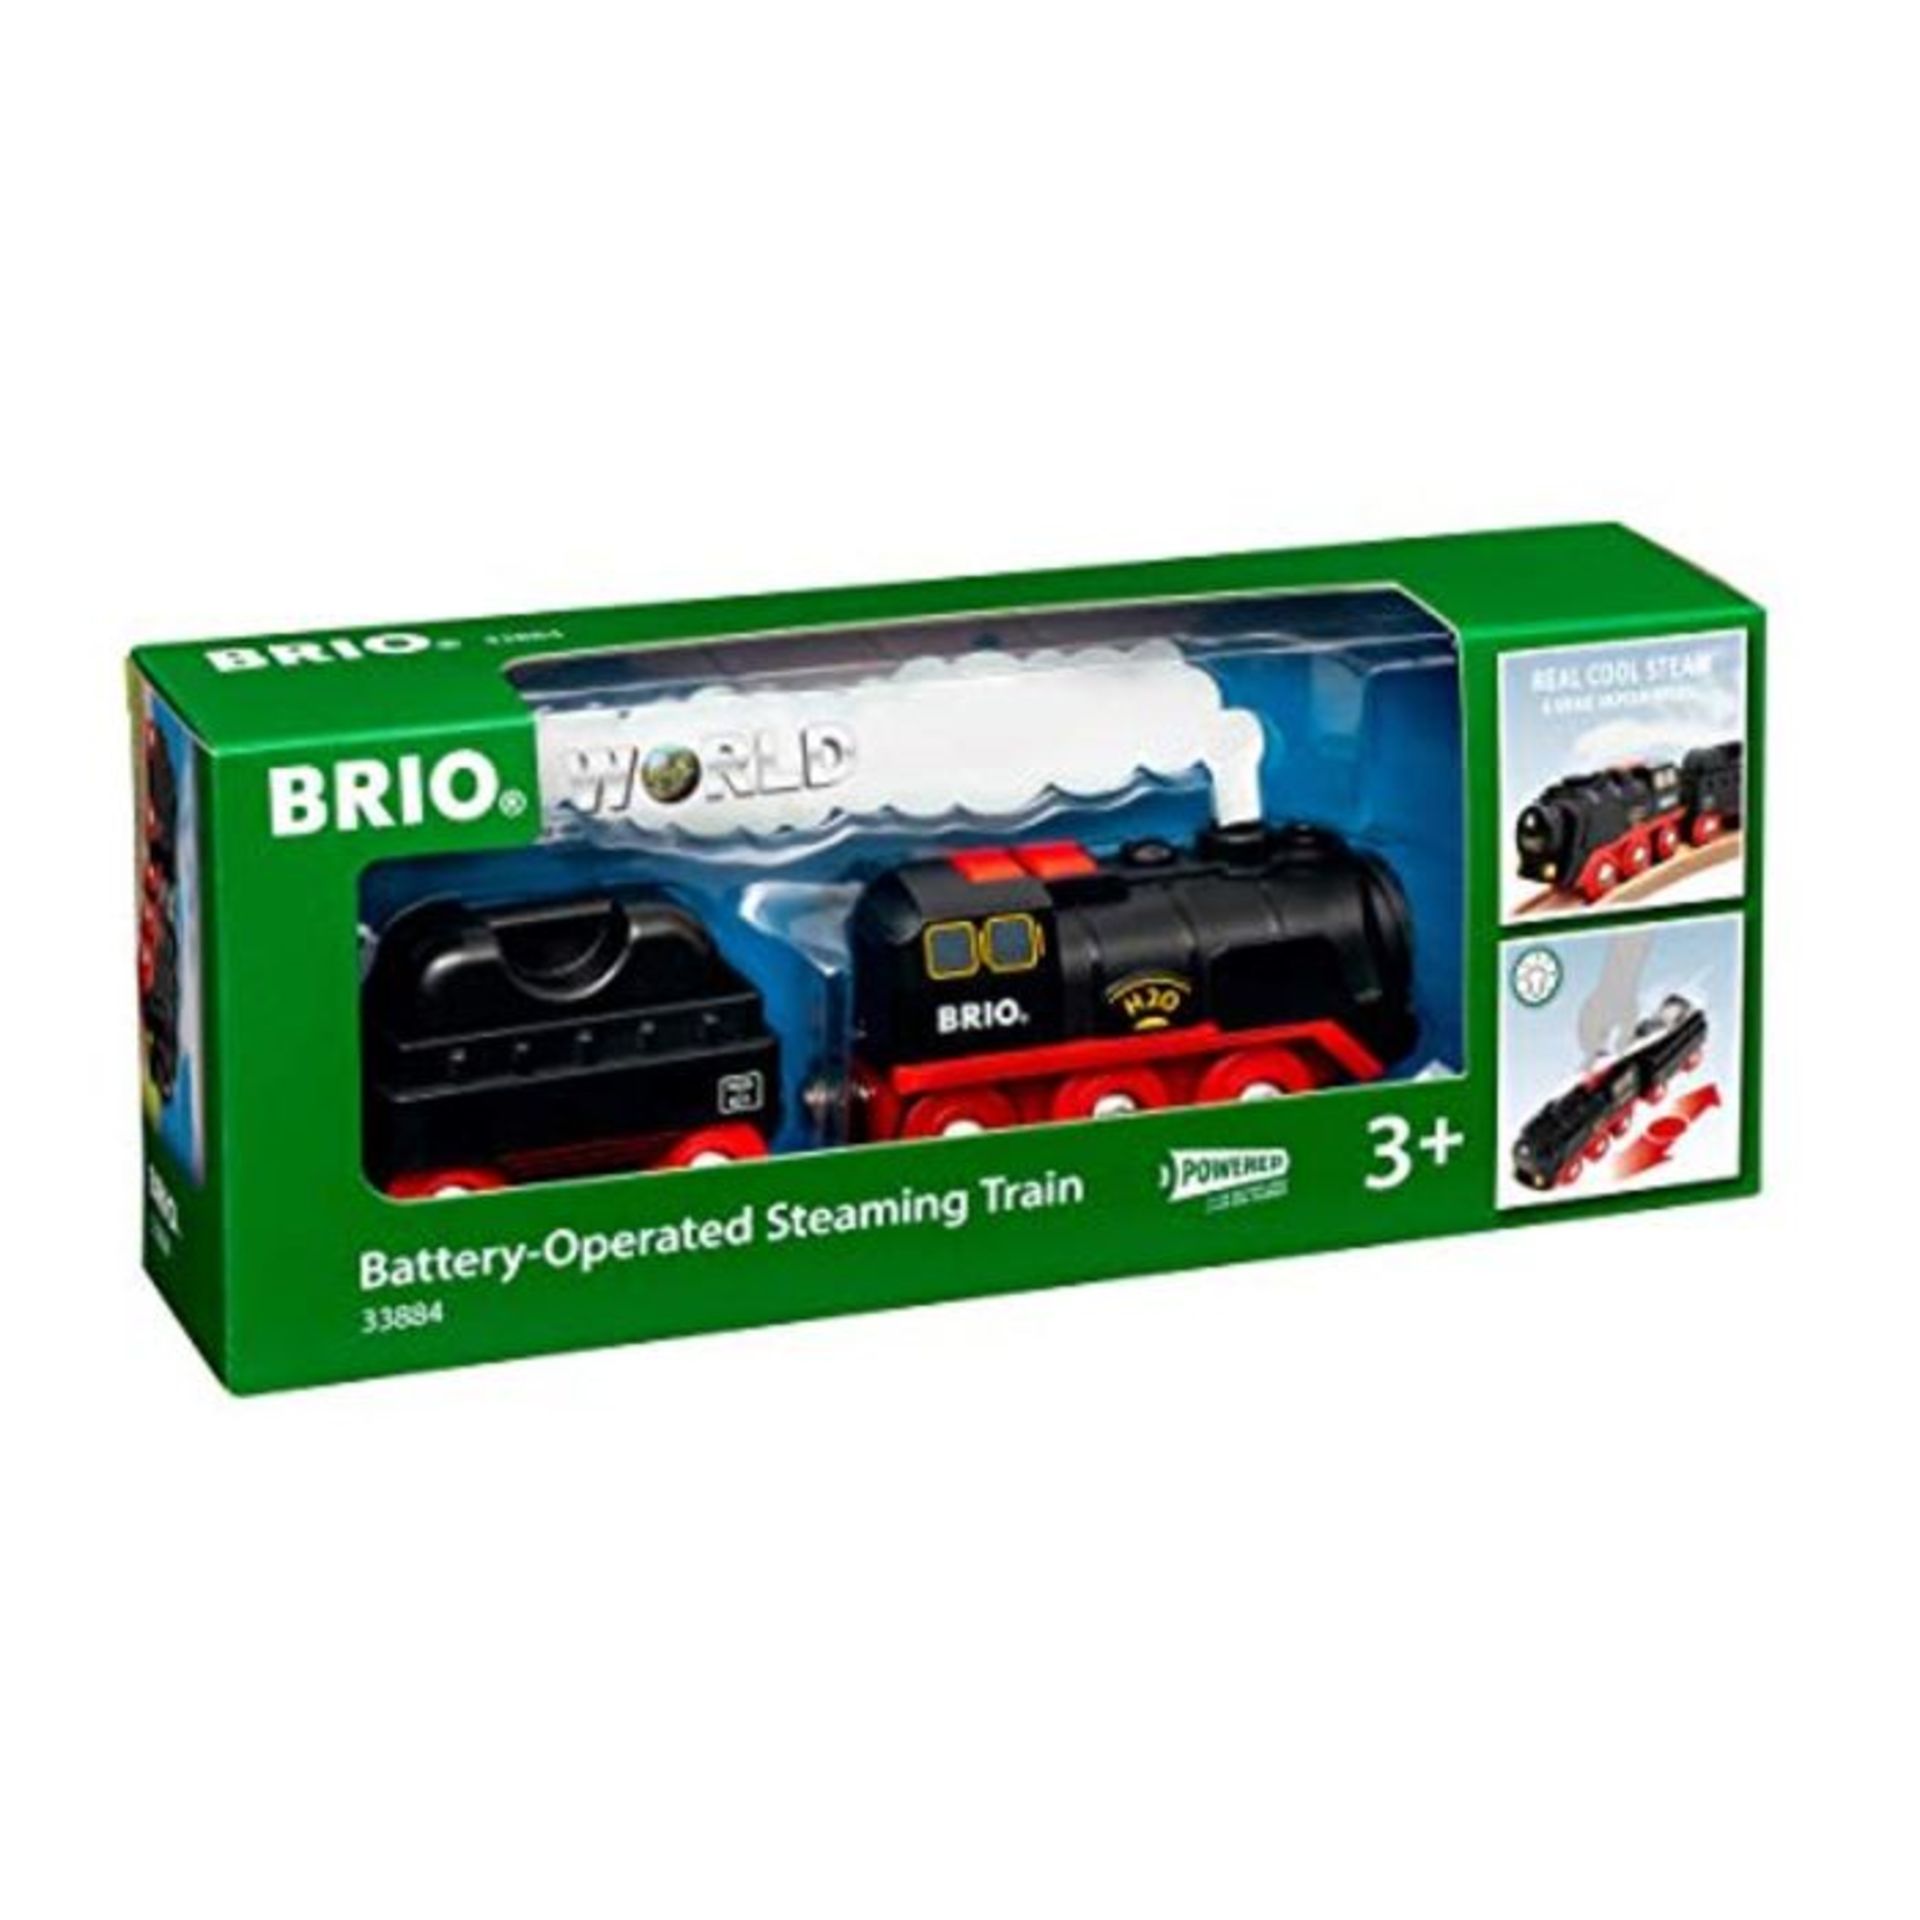 BRIO World - Battery Operated Steaming Train For Kids Age 3 Years and Up - Compatible